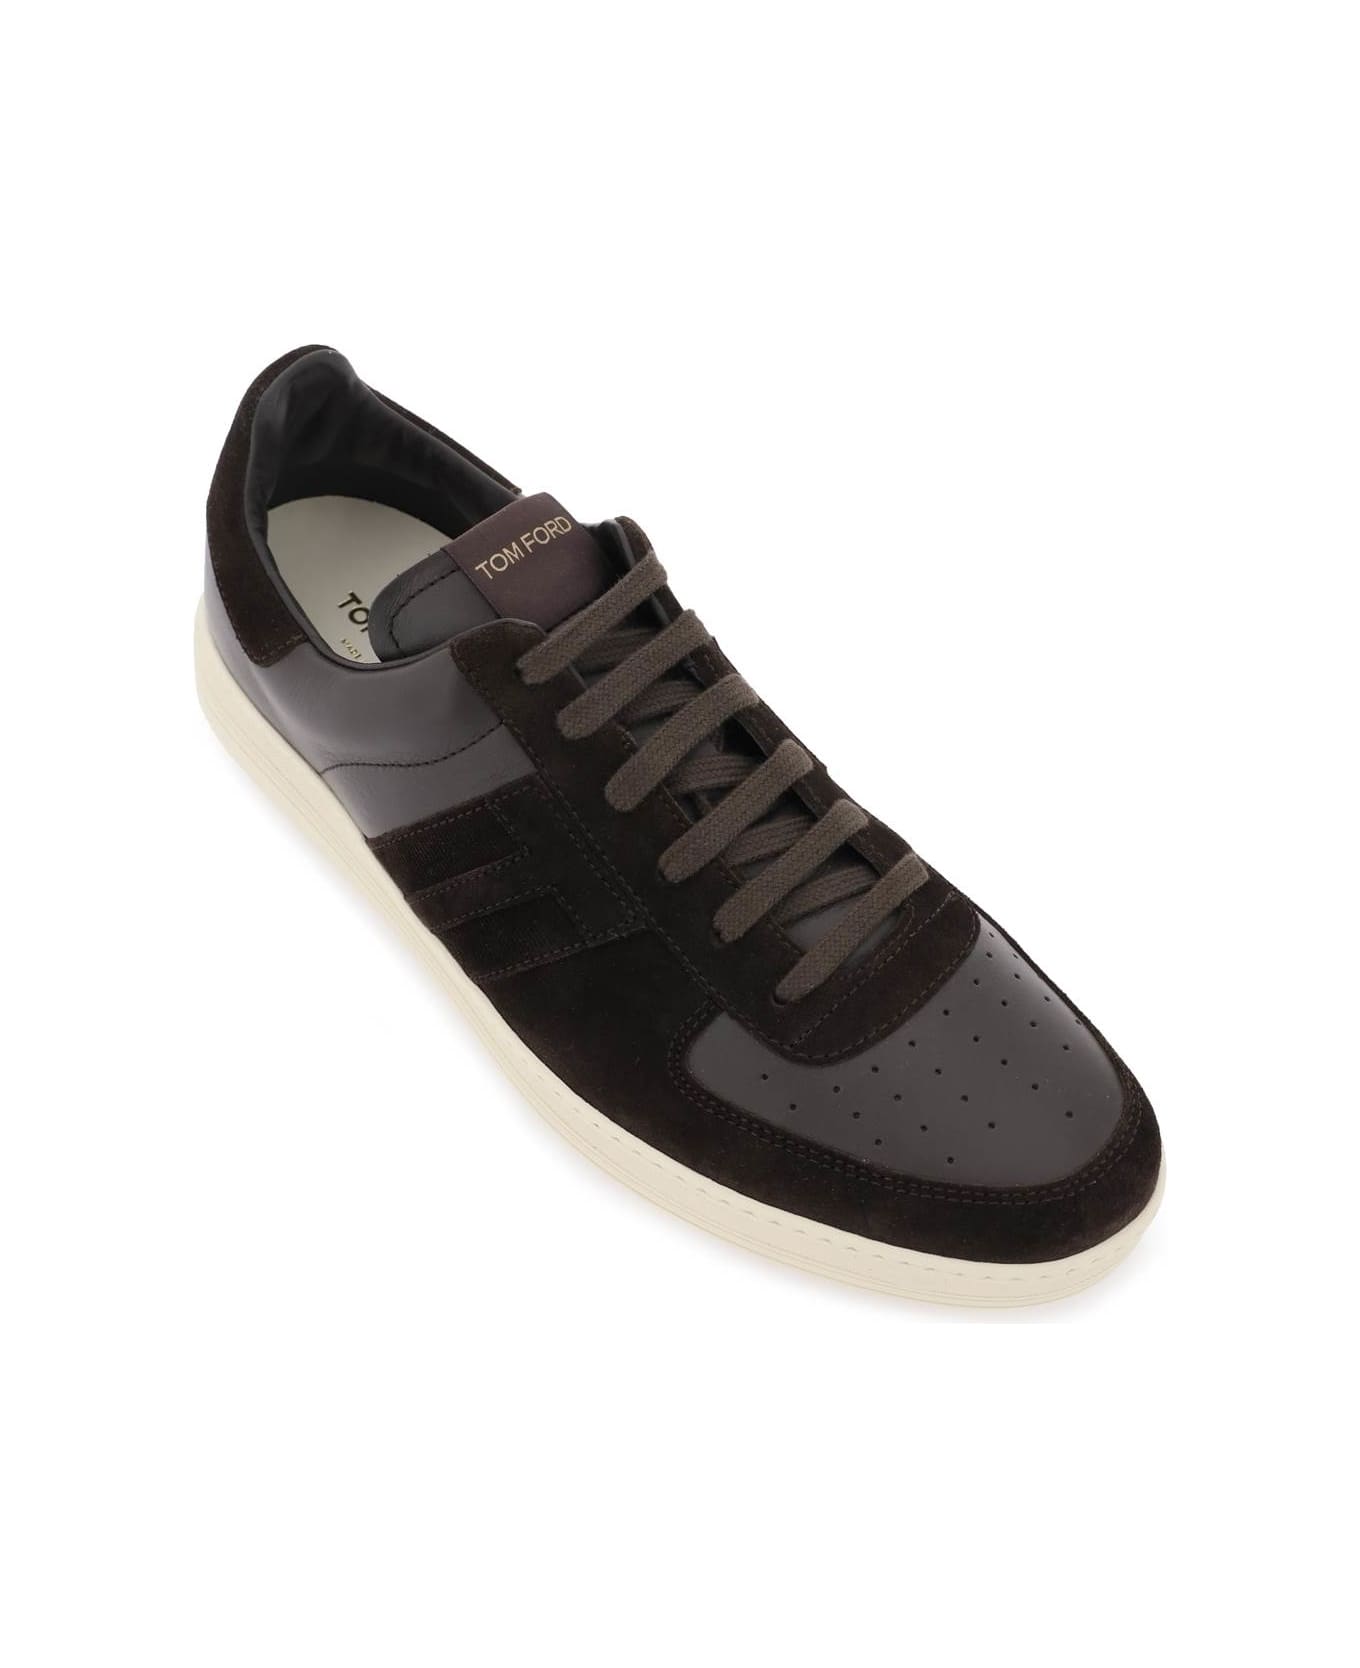 Tom Ford Radcliffe Low Top Sneakers - Brown/cream